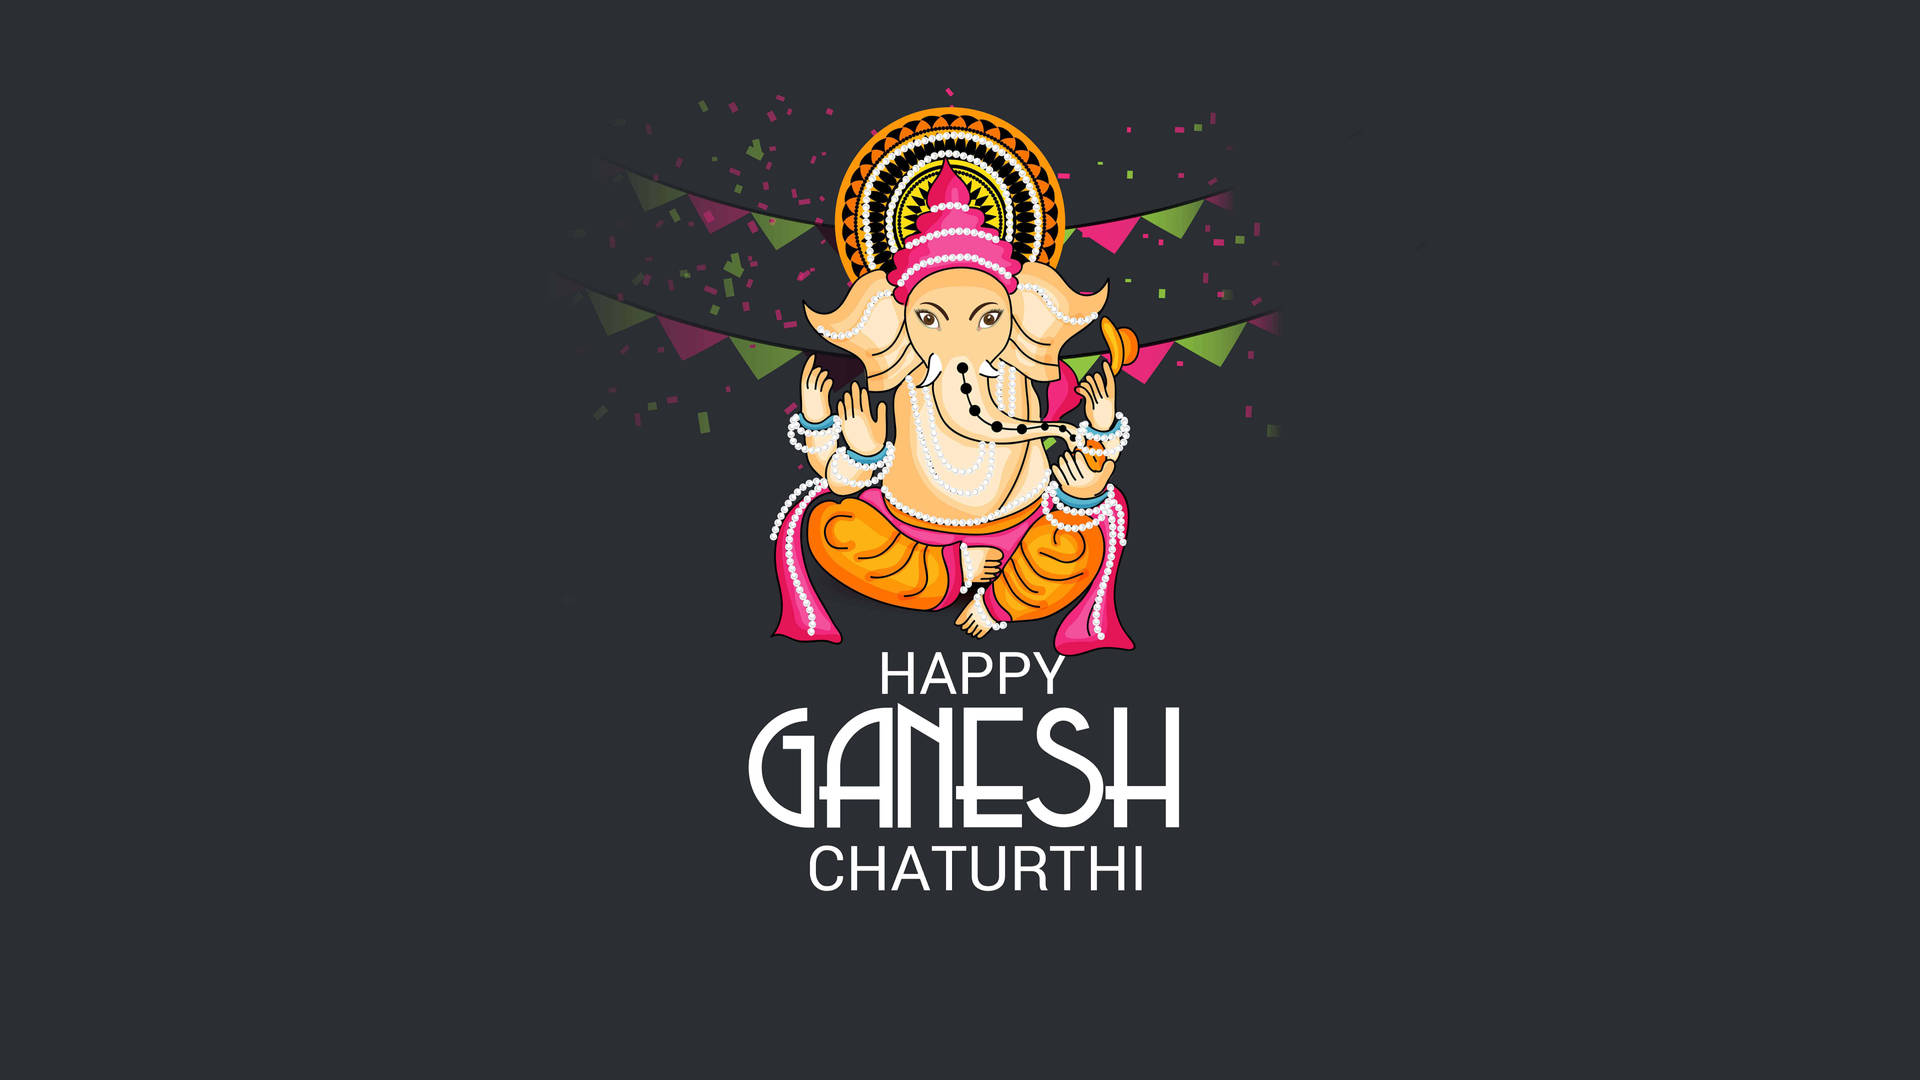 Ganesh Chaturthi Background And Wallpaper Images  BRD Pictures